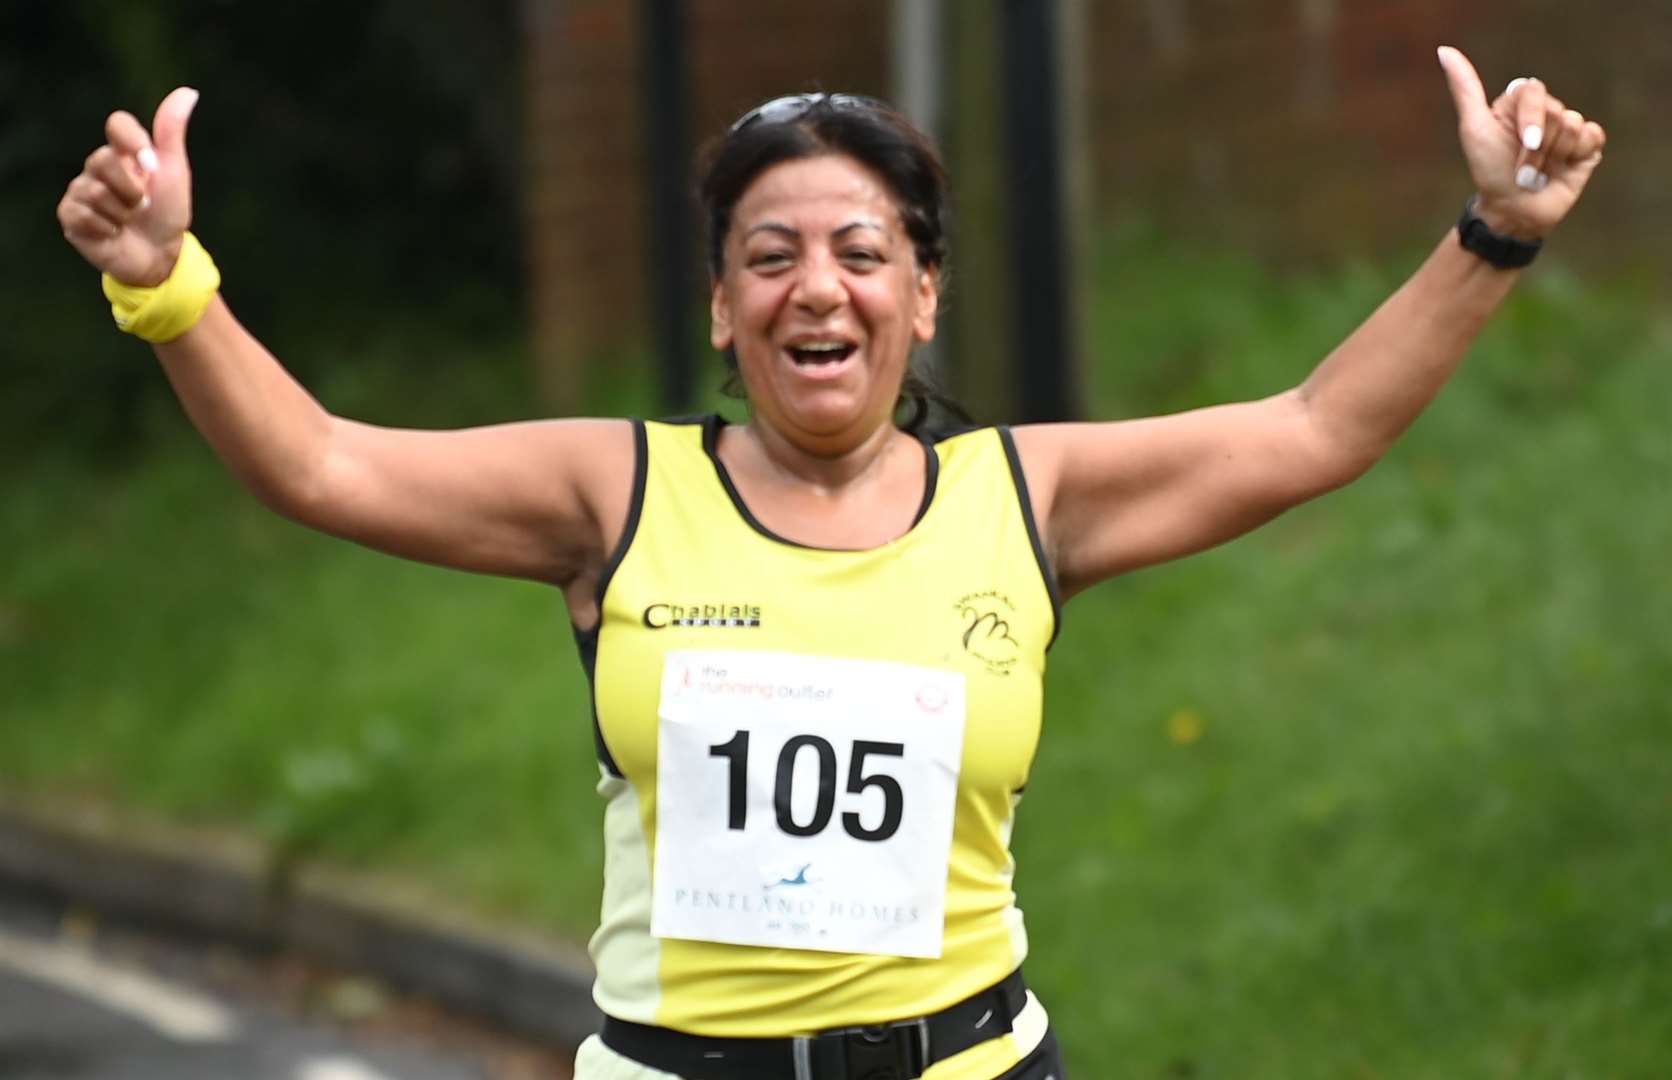 Swanley & District AC's Sita Dawson. Picture: Barry Goodwin (49789712)